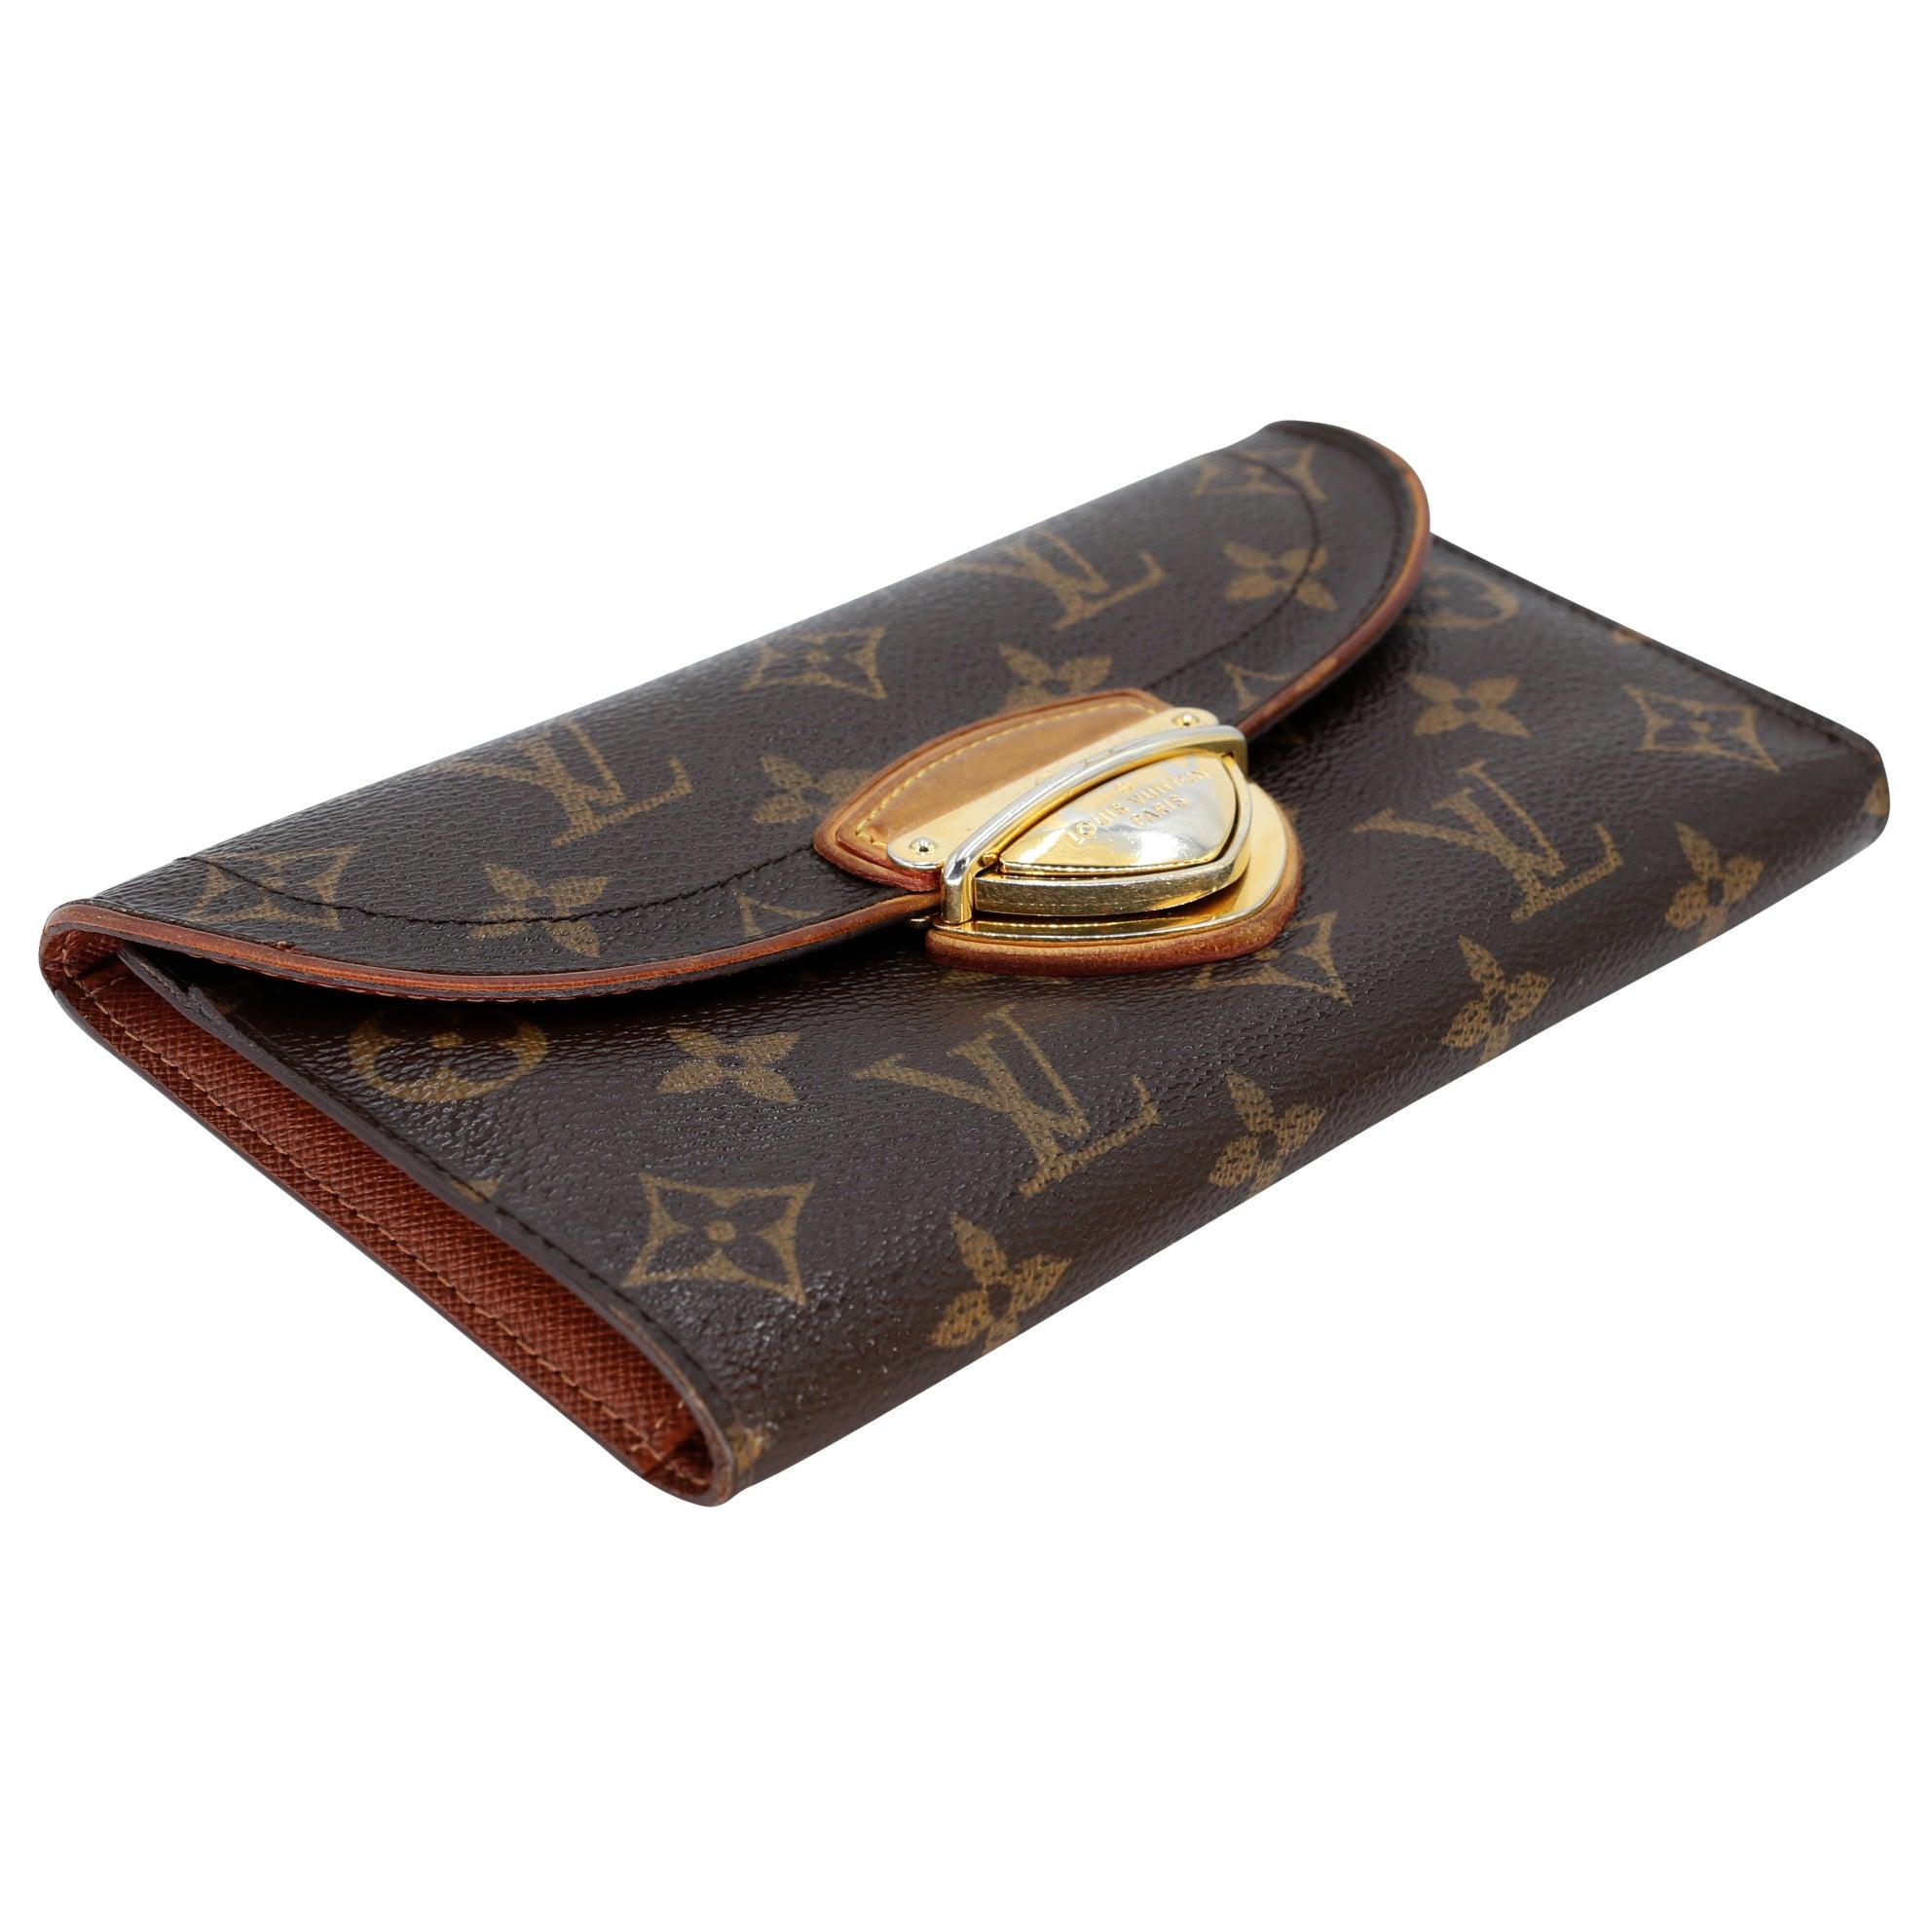 Louis Vuitton Portefeiulle Eugenie French Push-lock Wallet LV-W1020P-A002 In Good Condition For Sale In Downey, CA